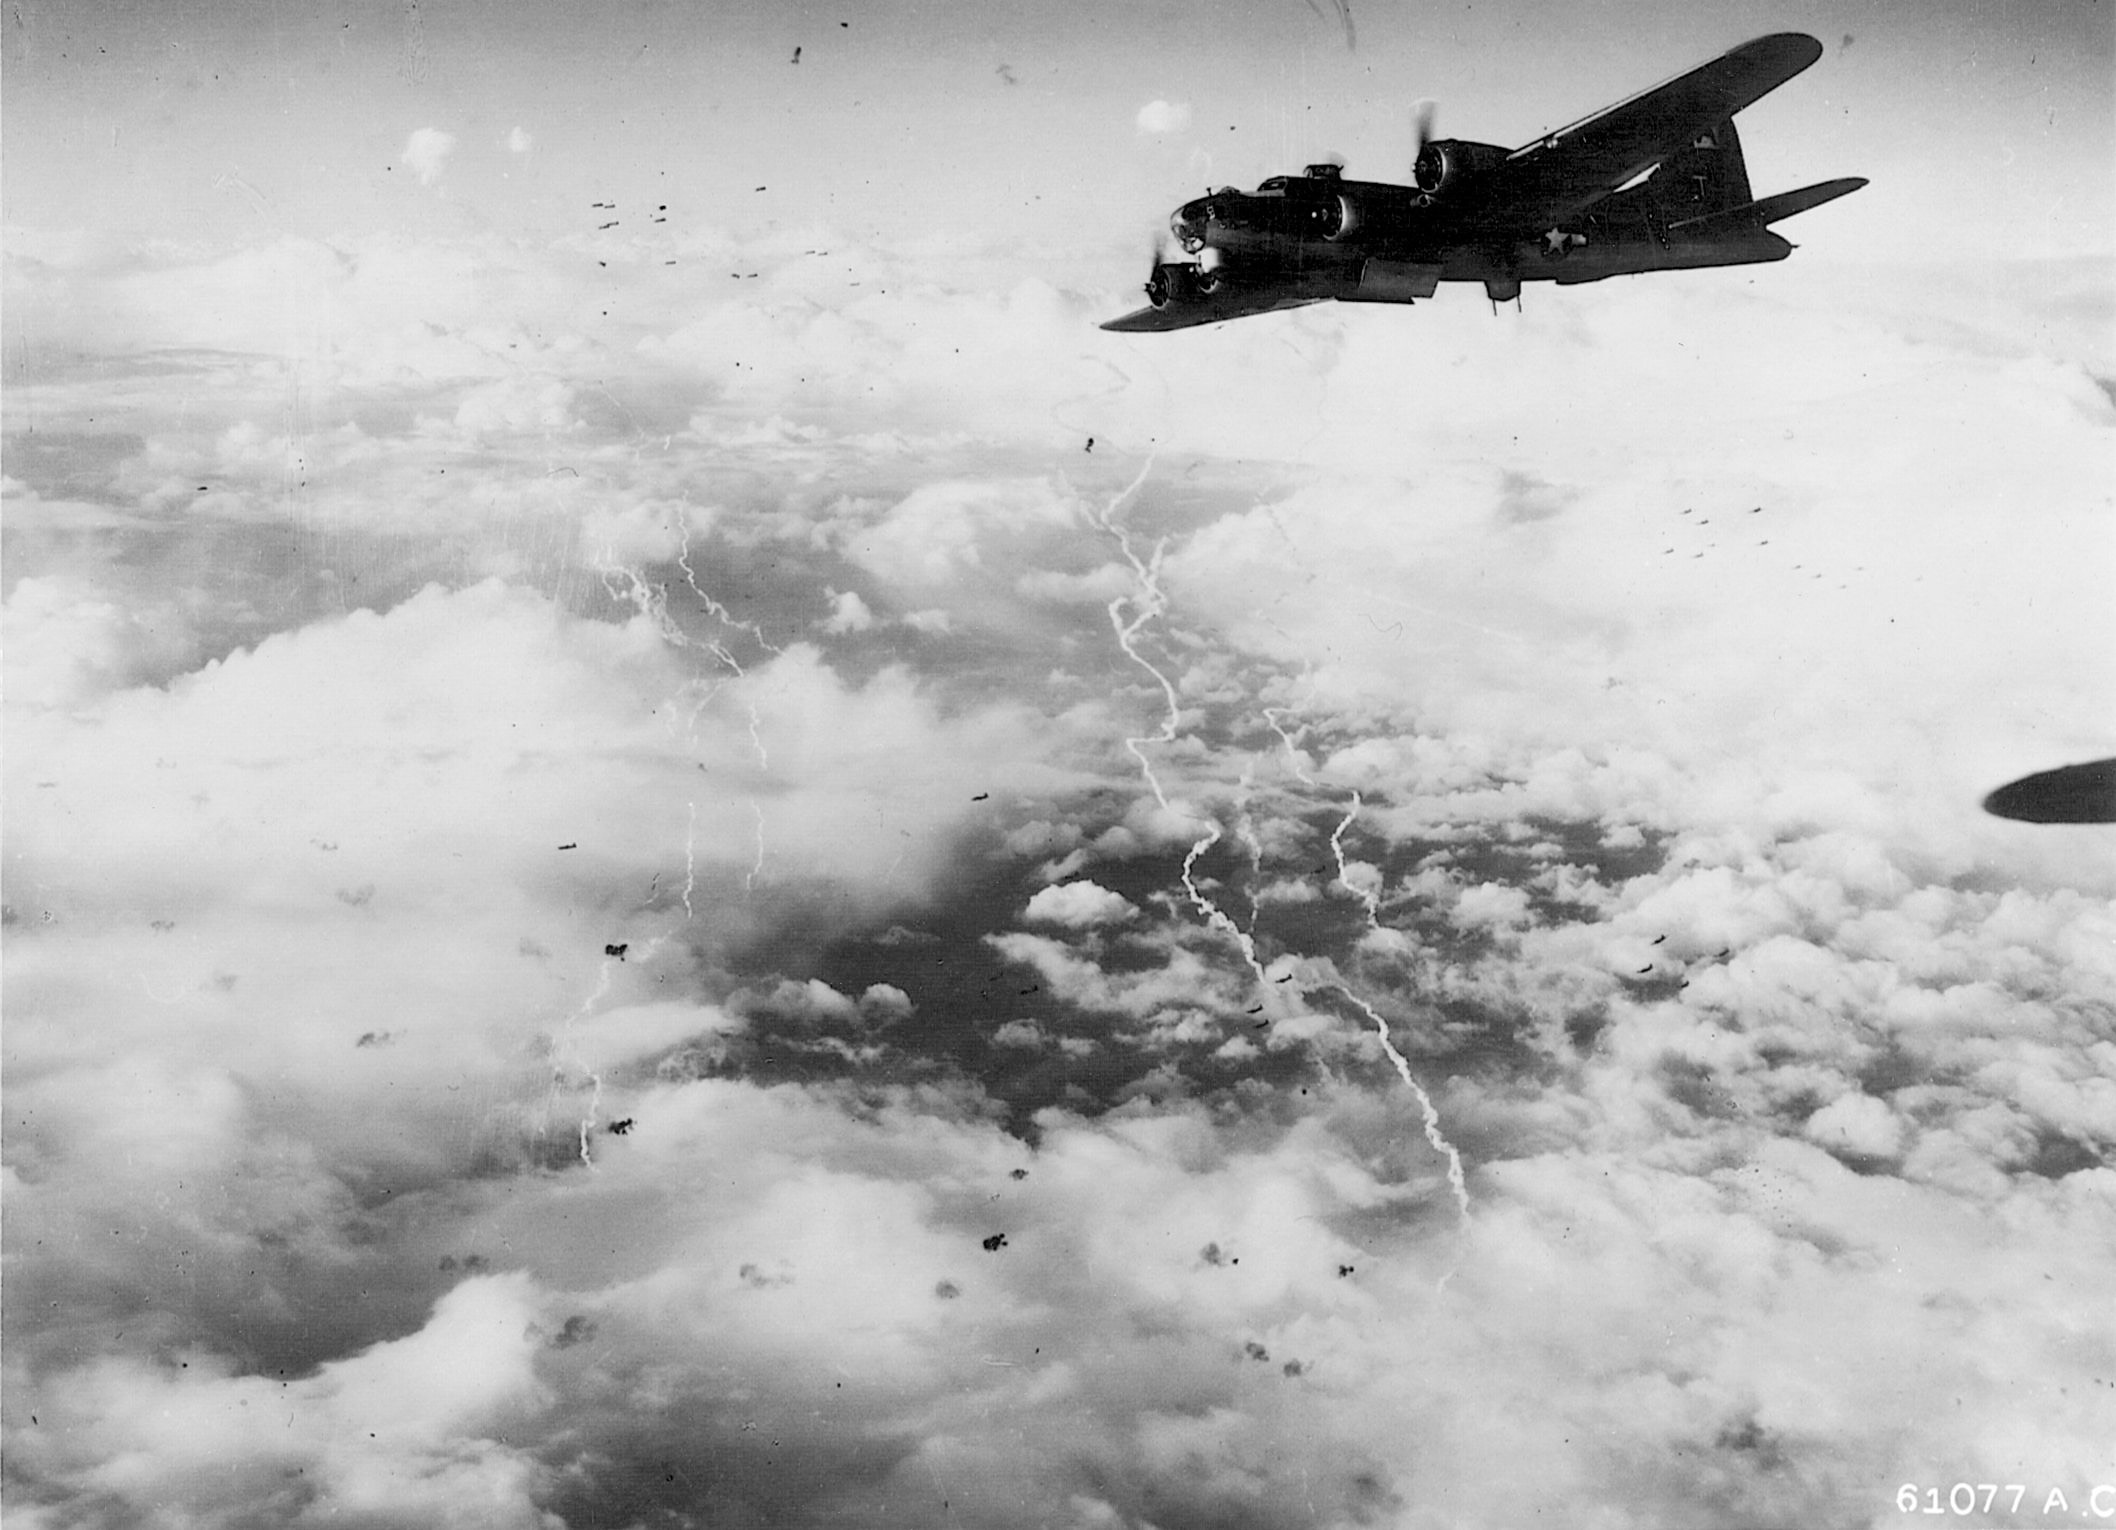 A B-17 endures heavy flak and cloud cover during a hazardous bomb run over Merseburg. Prior to their 26th mission on November 30, 1944, Pilot Hugh Hardwicke and the crew of Uninvited had already flown one mission to the heavily defended target. 